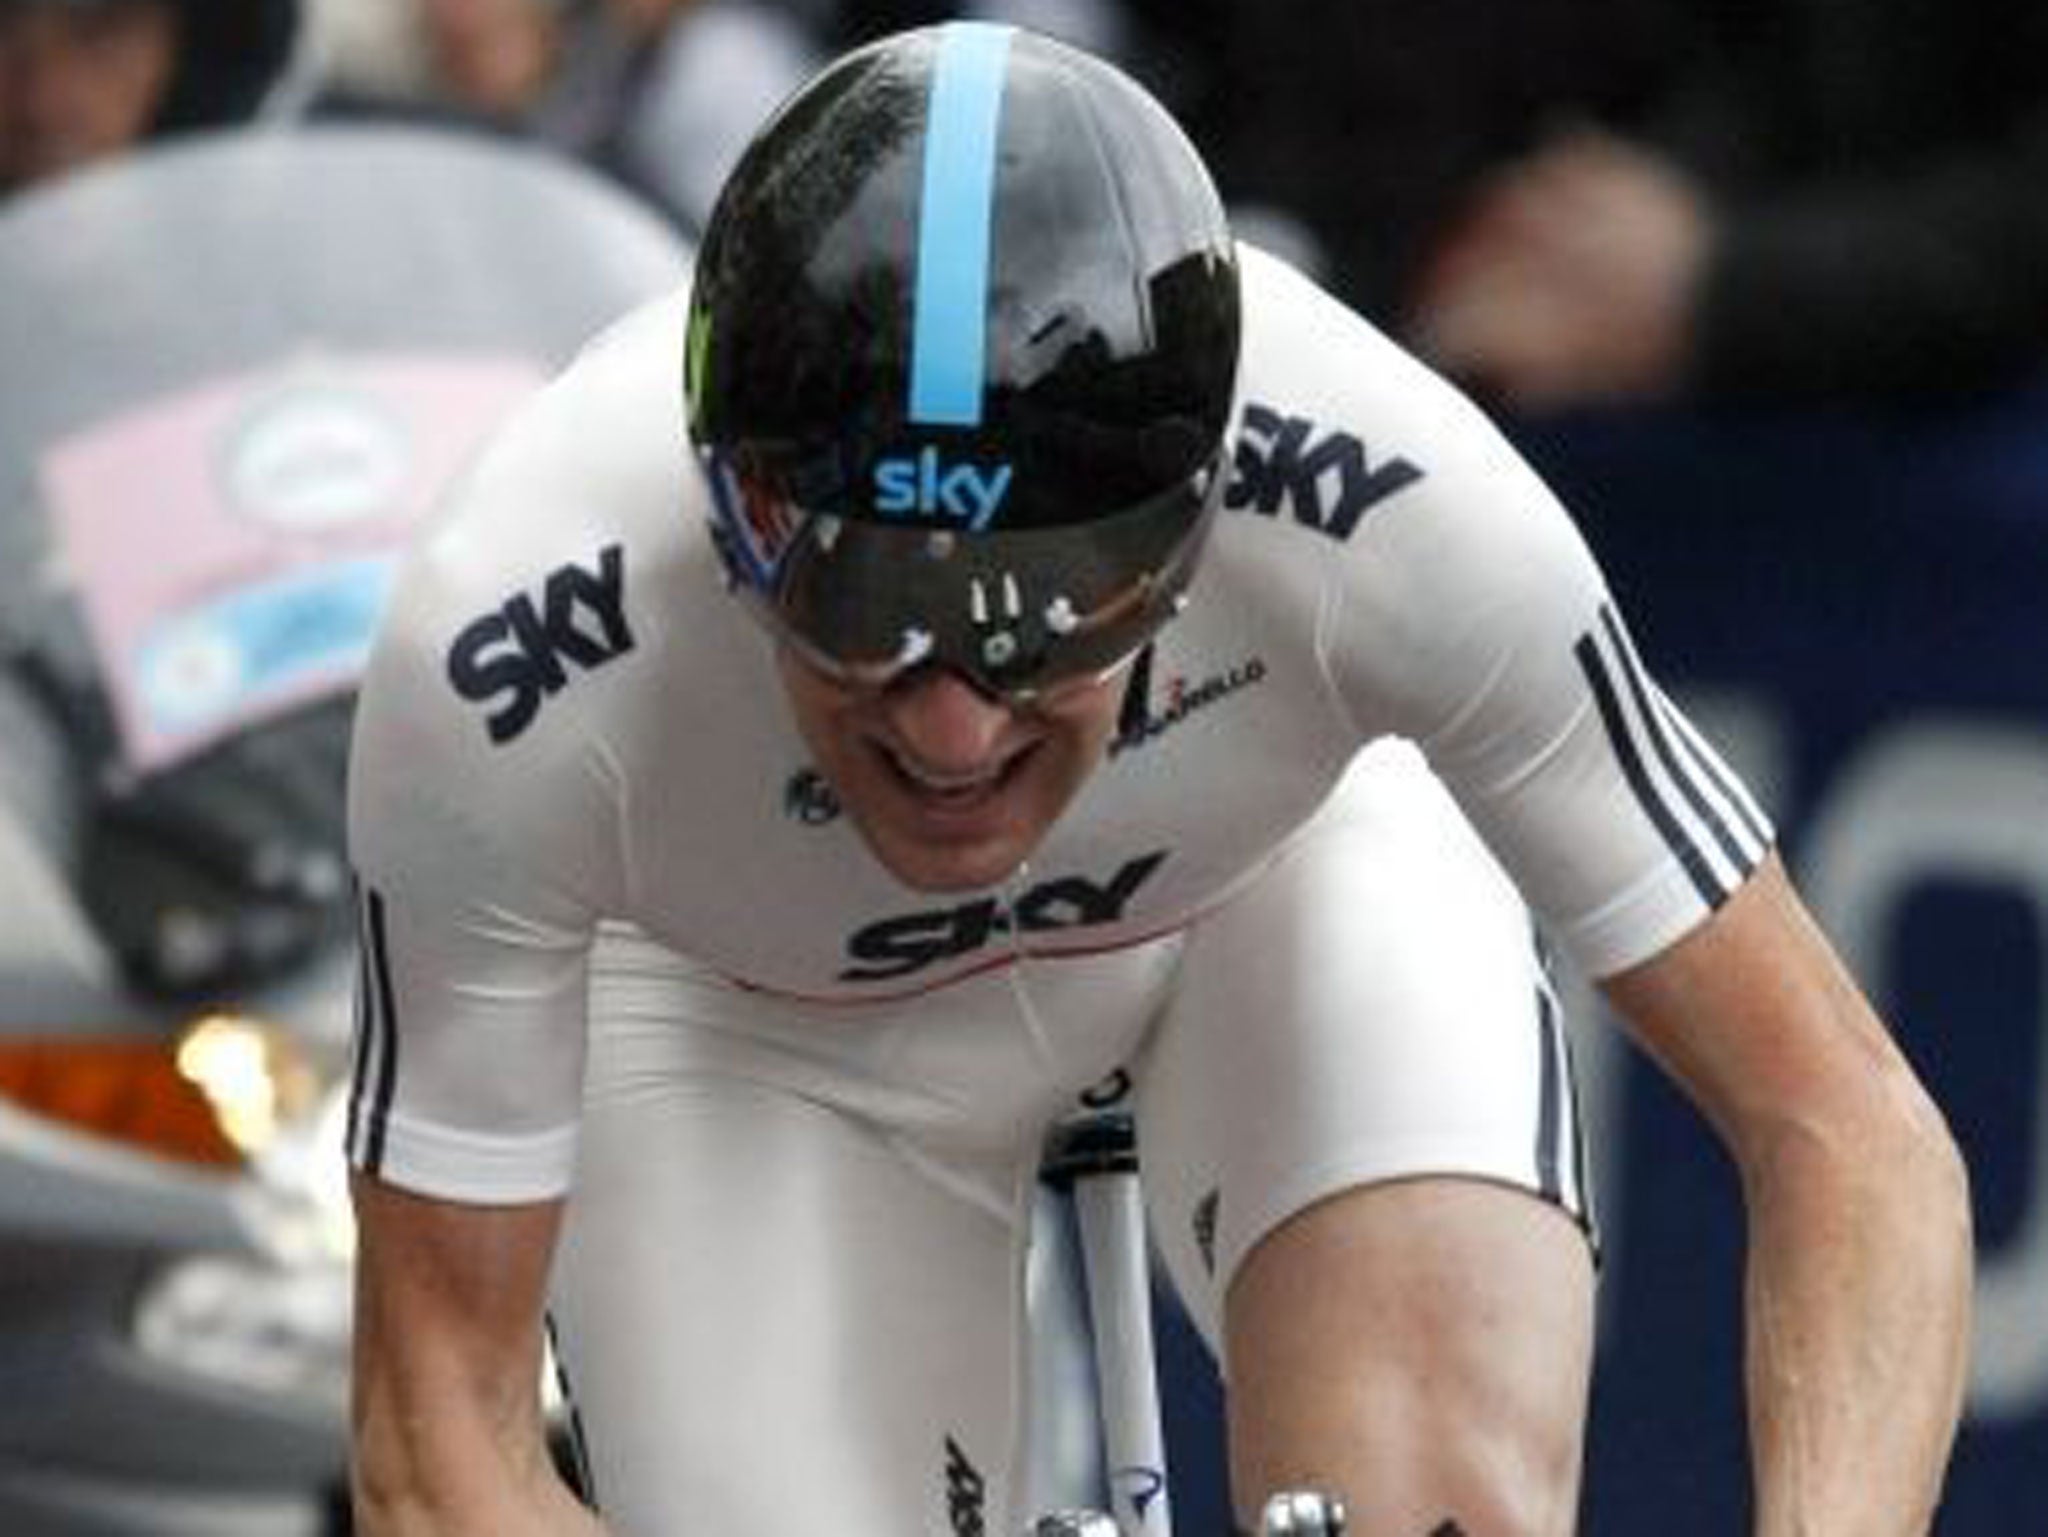 Bradley Wiggins on his way to victory in the opening stage time trial of the 2010 Giro d’Italia